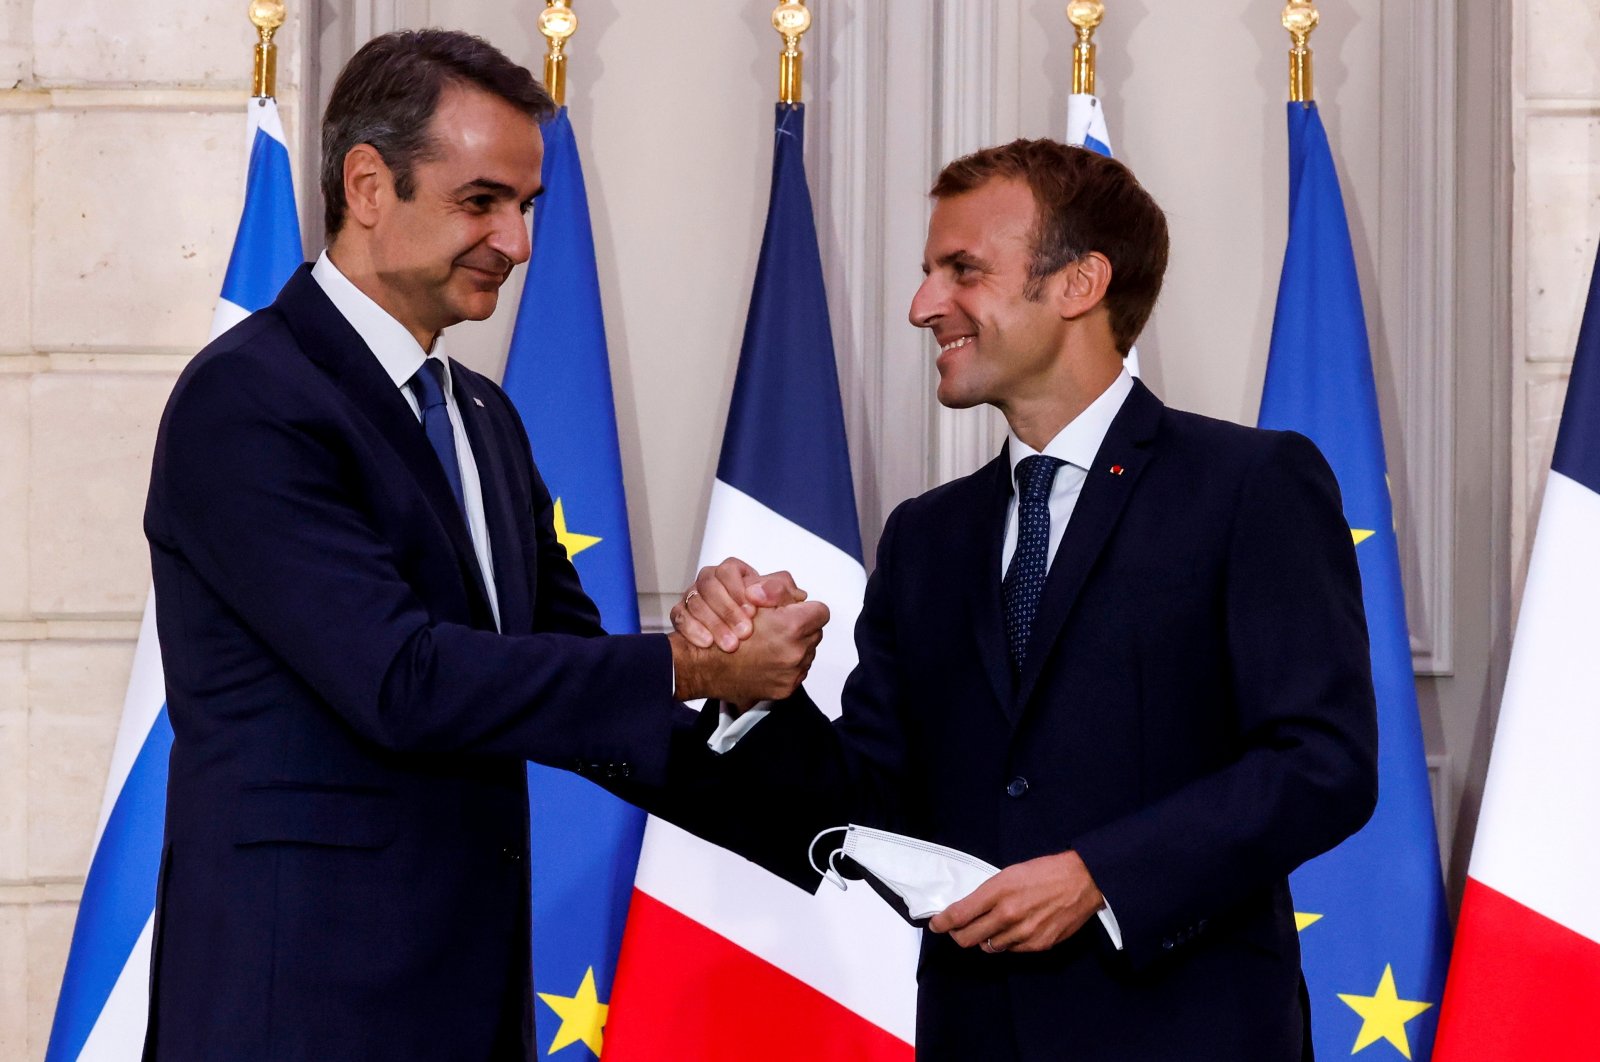 Greek Prime Minister Kyriakos Mitsotakis shakes hands with French President Emmanuel Macron following a signing ceremony of a new defense deal at the Elysee Palace in Paris, France Sept. 28, 2021. (Reuters File Photo)